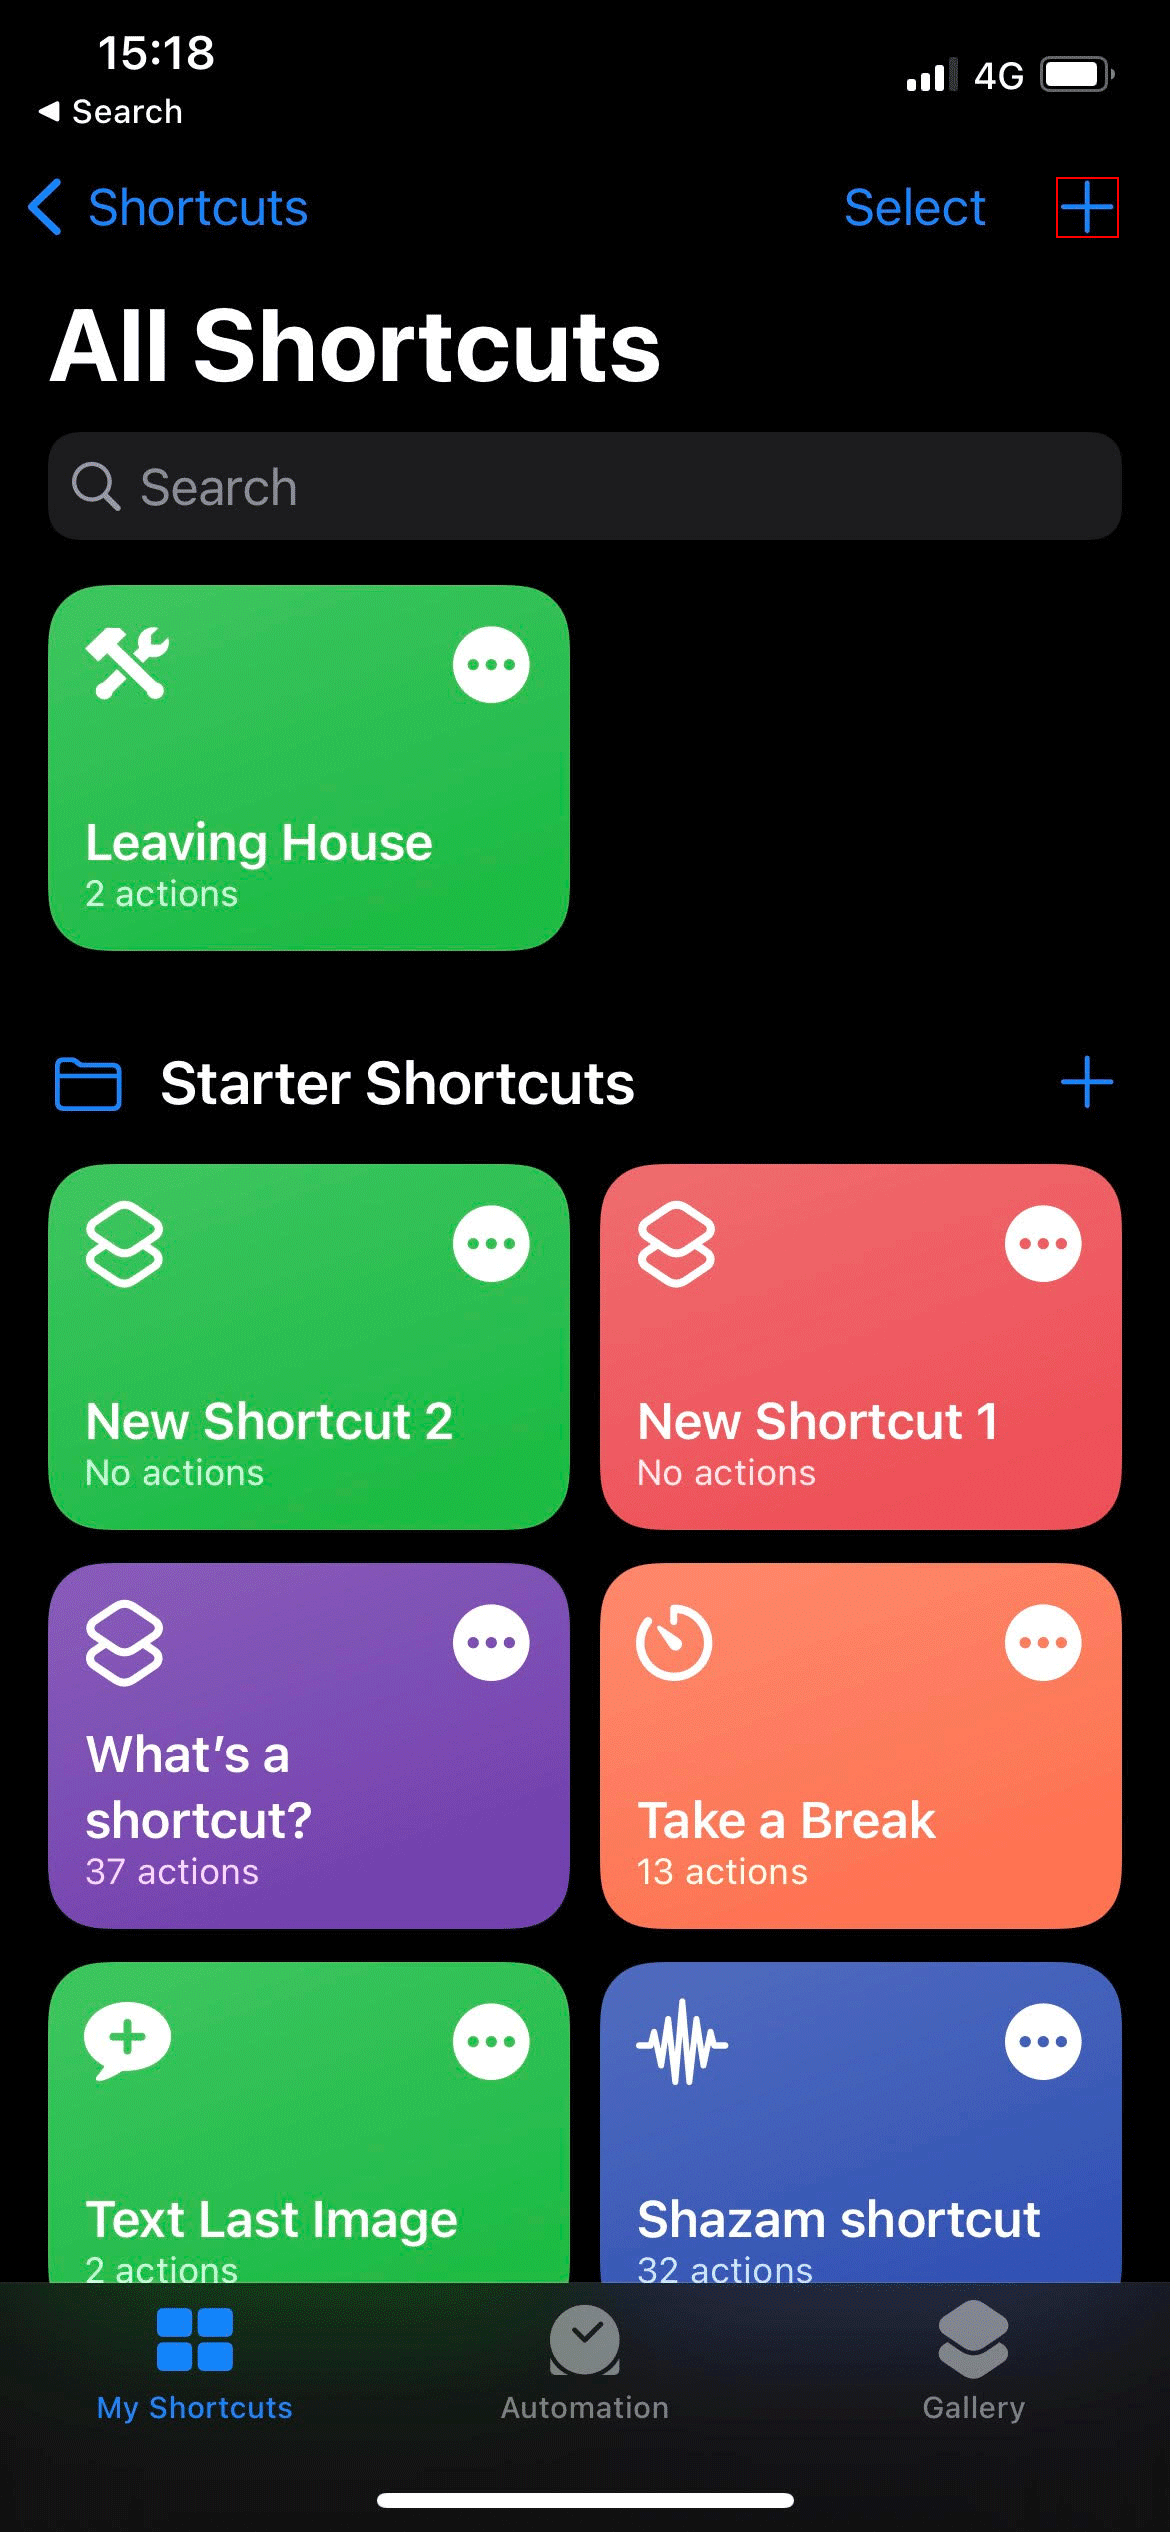 How to add a new shortcut within the Shurtcut app in IOS device to build the integration between the IFTTT and the Home automation system Ilevia